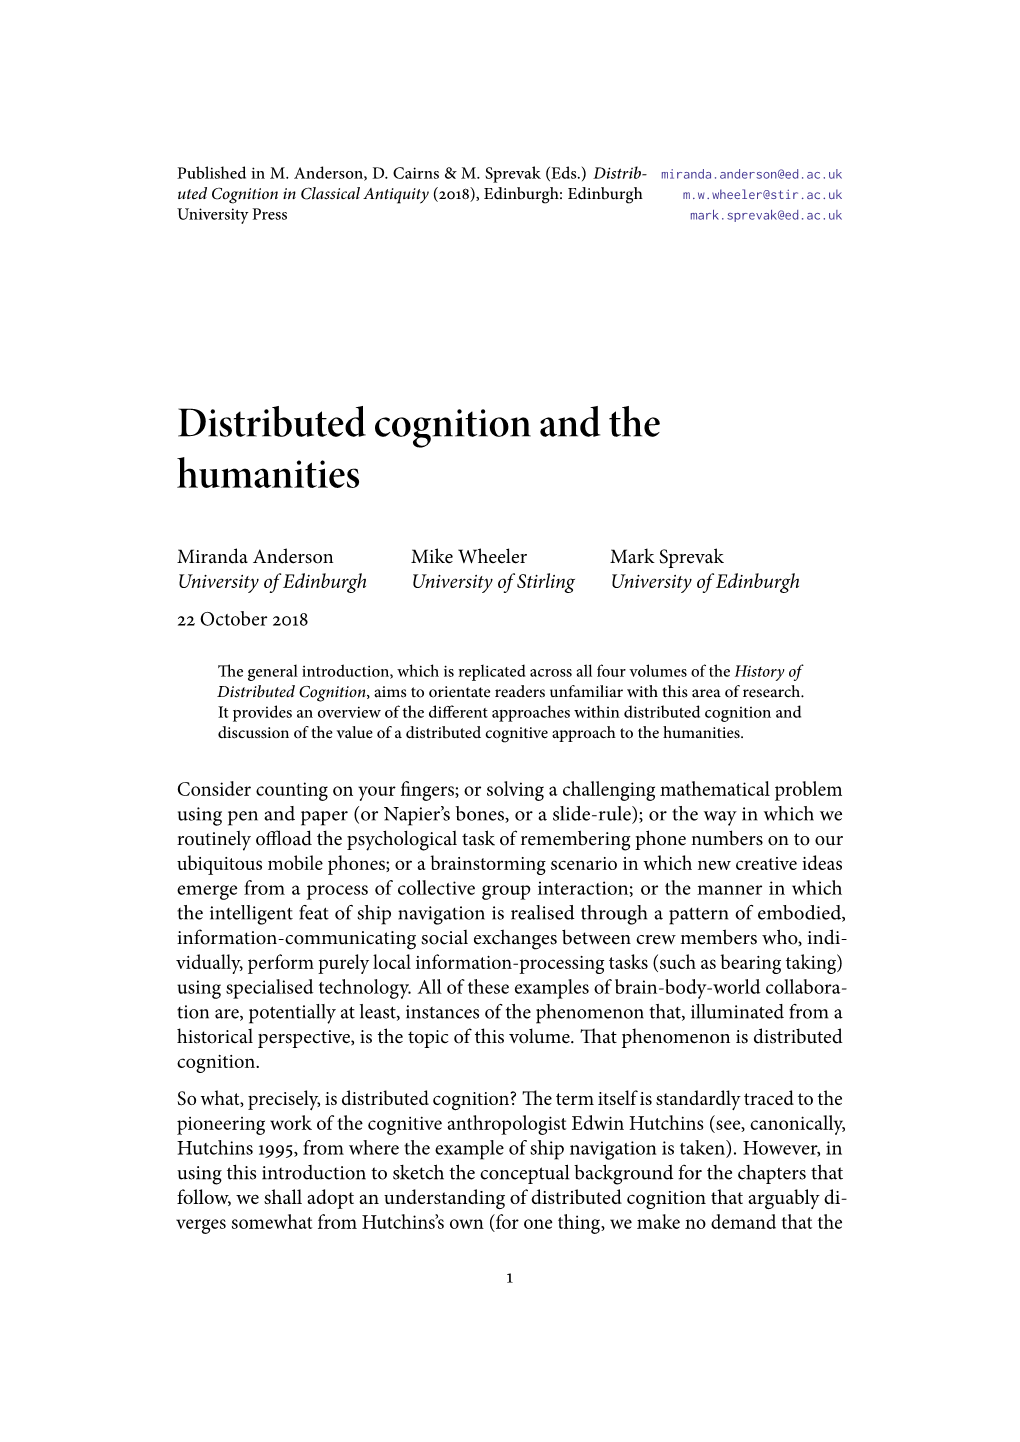 Distributed Cognition and the Humanities